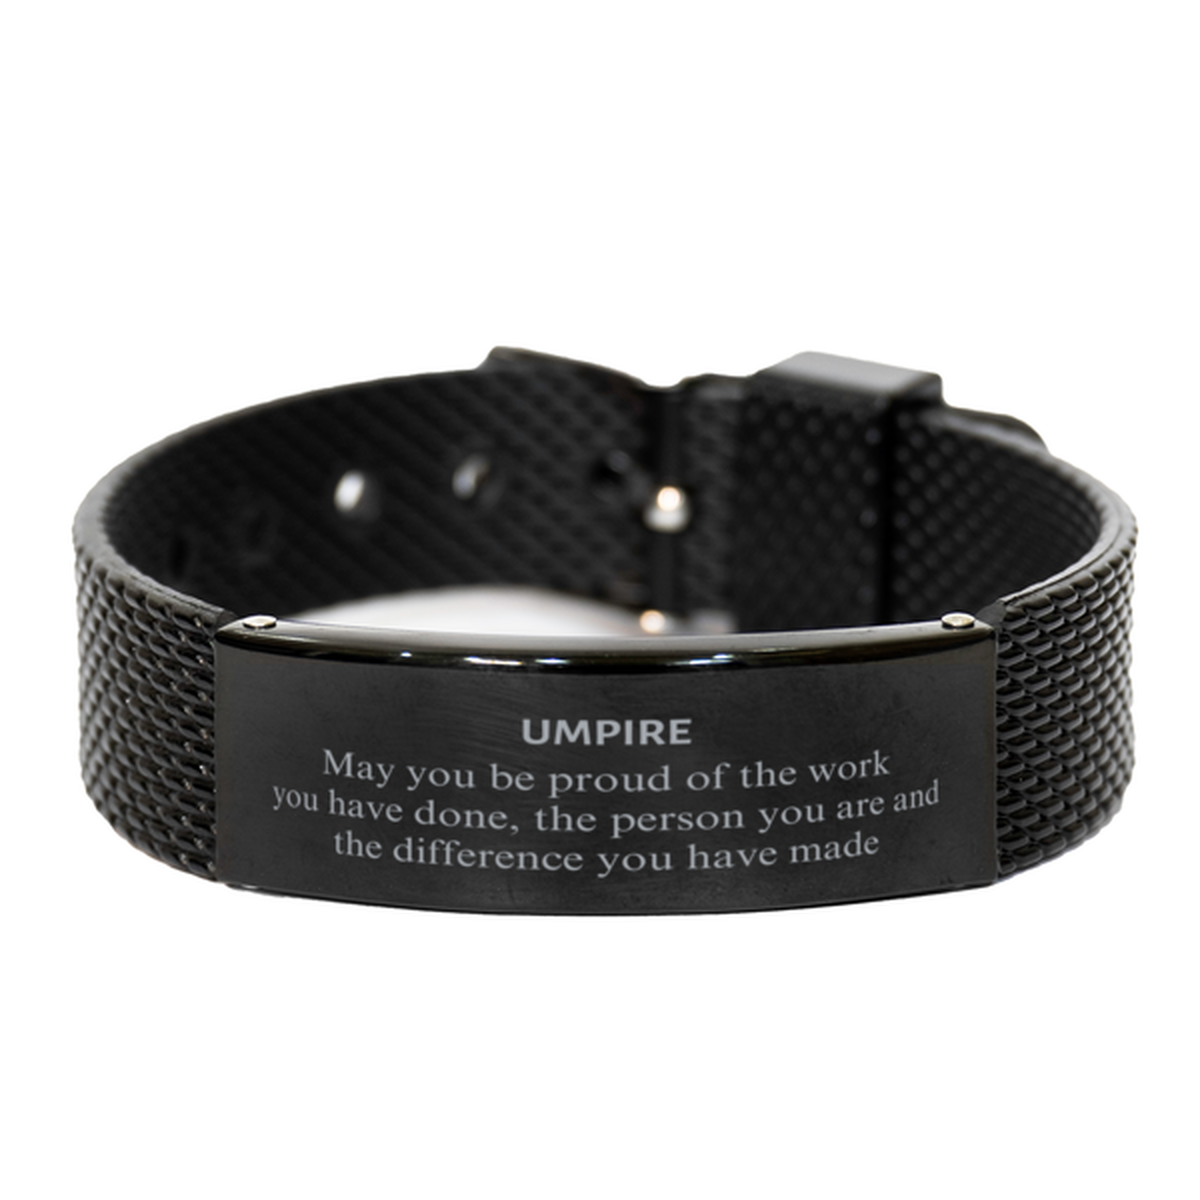 Umpire May you be proud of the work you have done, Retirement Umpire Black Shark Mesh Bracelet for Colleague Appreciation Gifts Amazing for Umpire